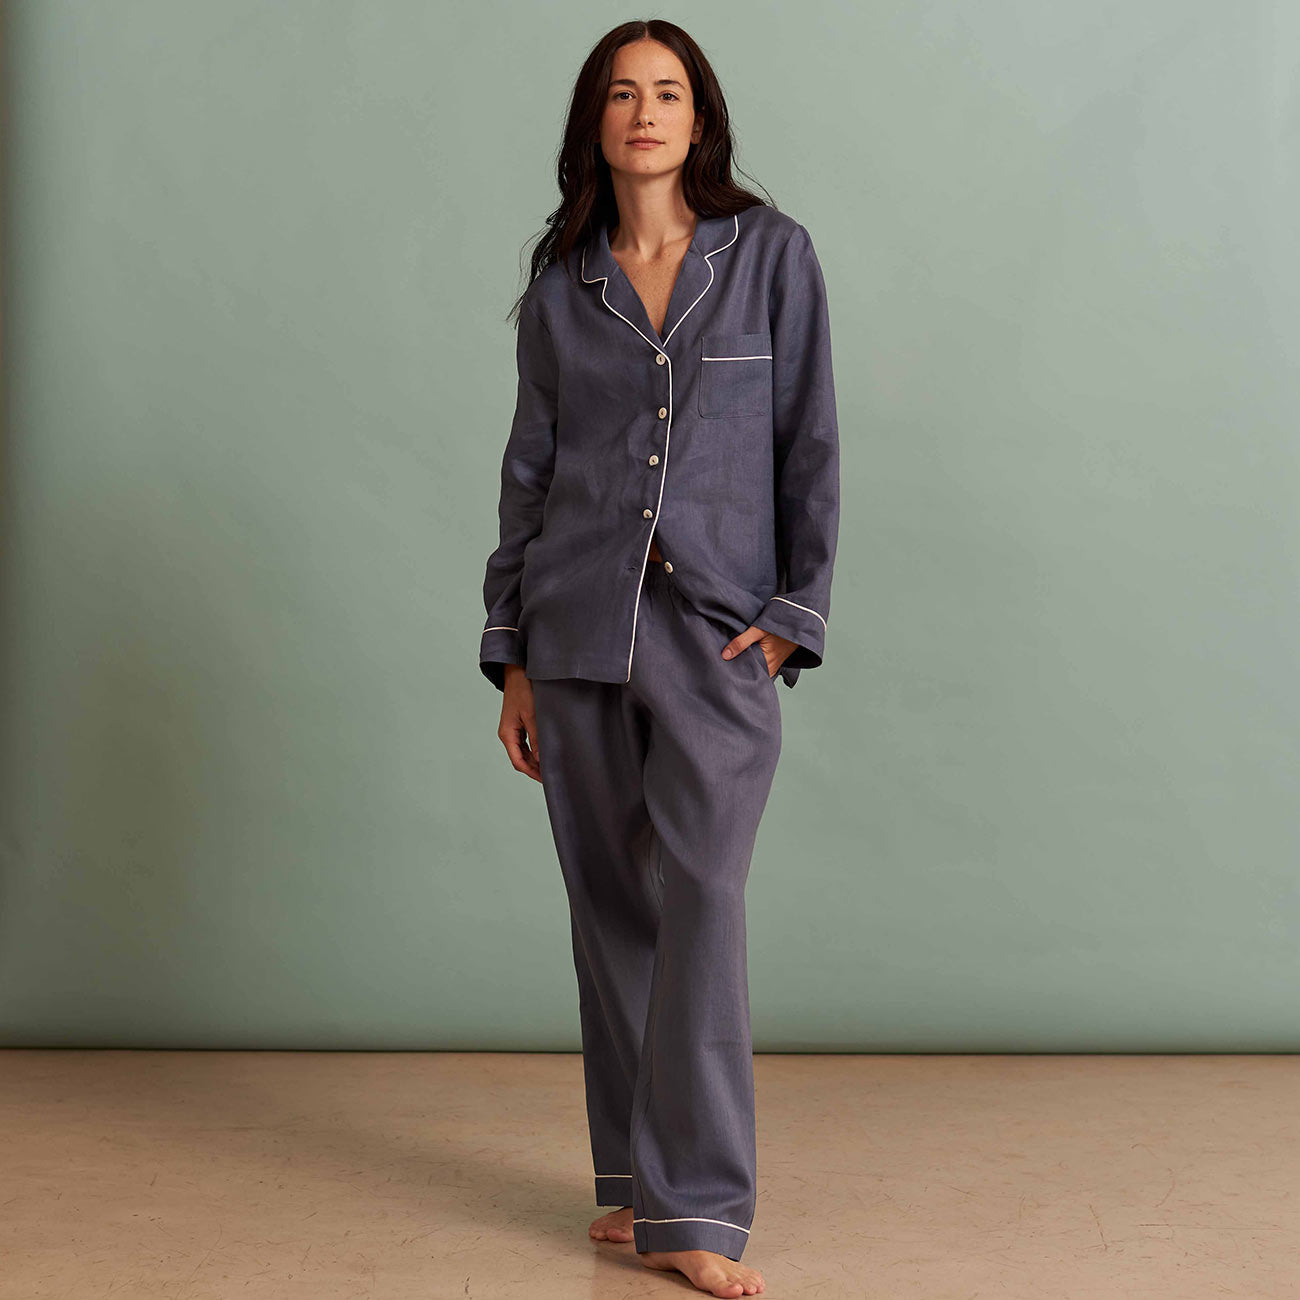 Take a serene stroll down the comfort lane in this nightwear set by Mystere  Paris. Full of bright hues and subtle prints, this nightwear will steal  your heart. Upgrade your nightwear style